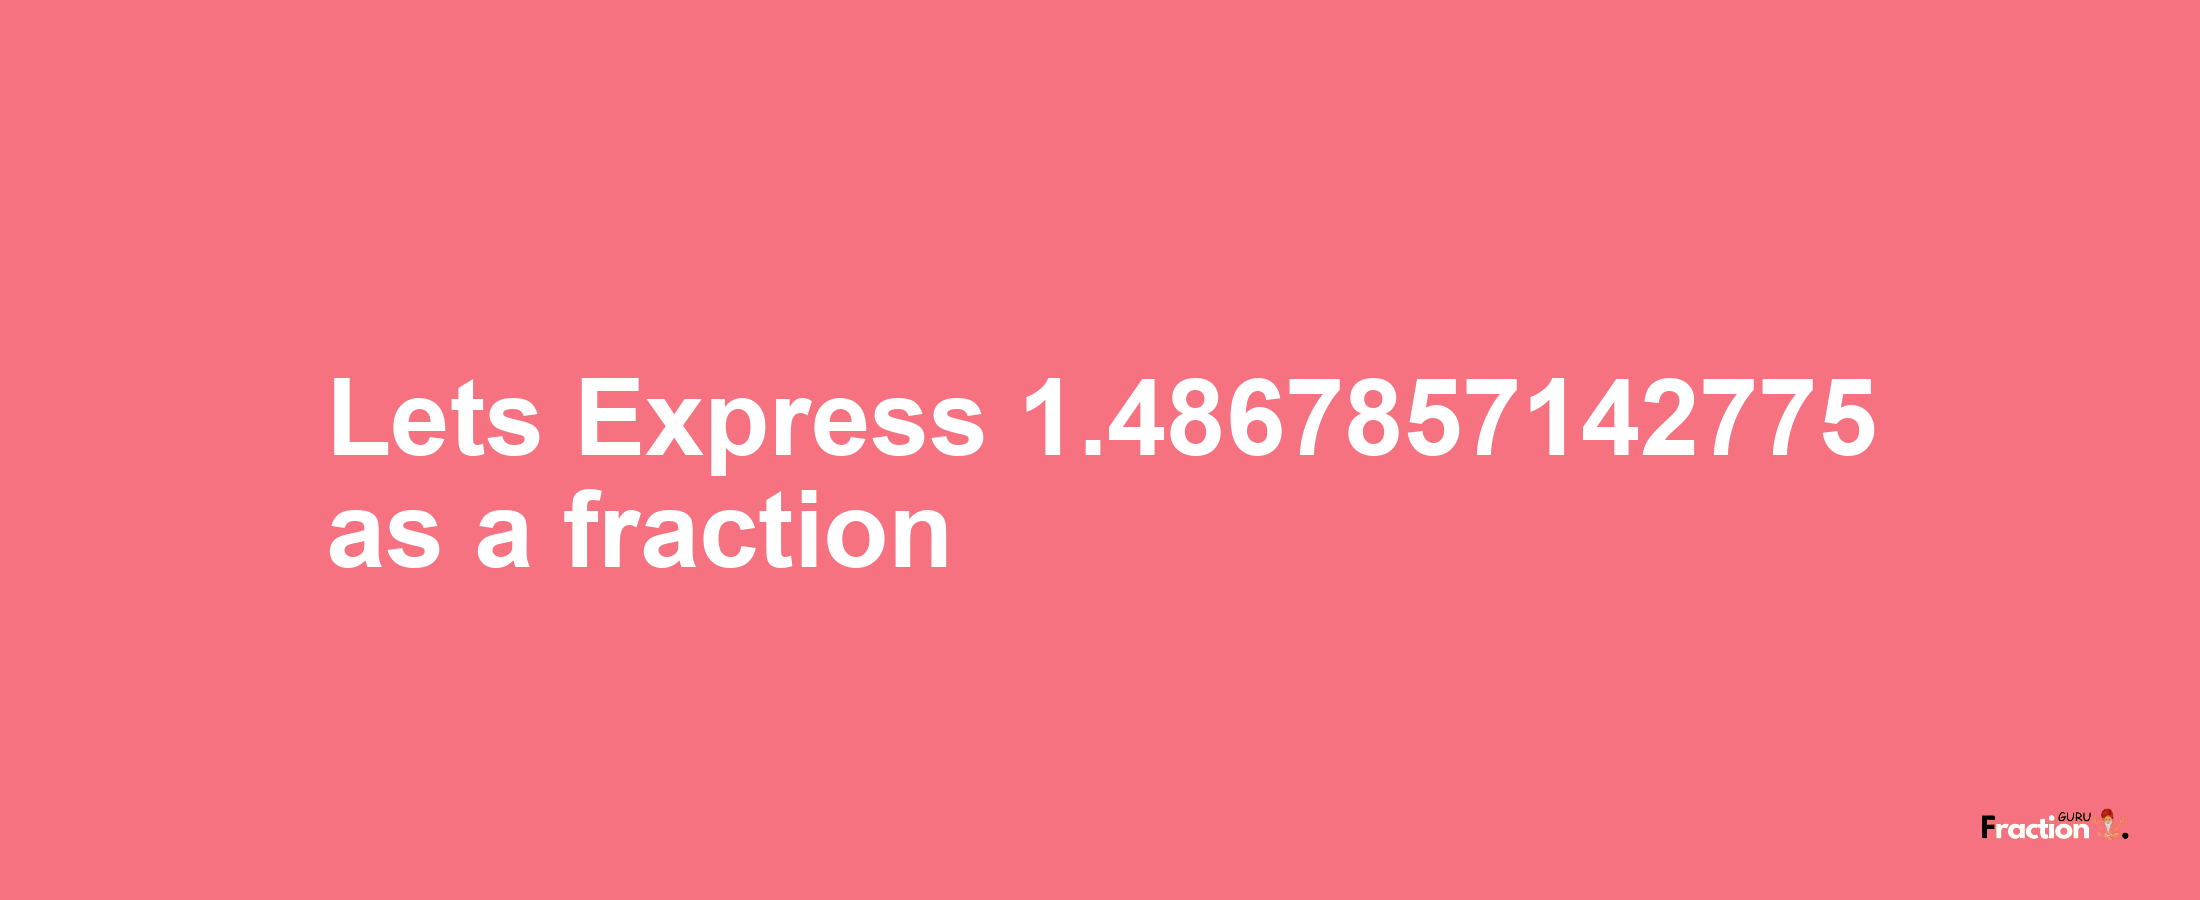 Lets Express 1.4867857142775 as afraction